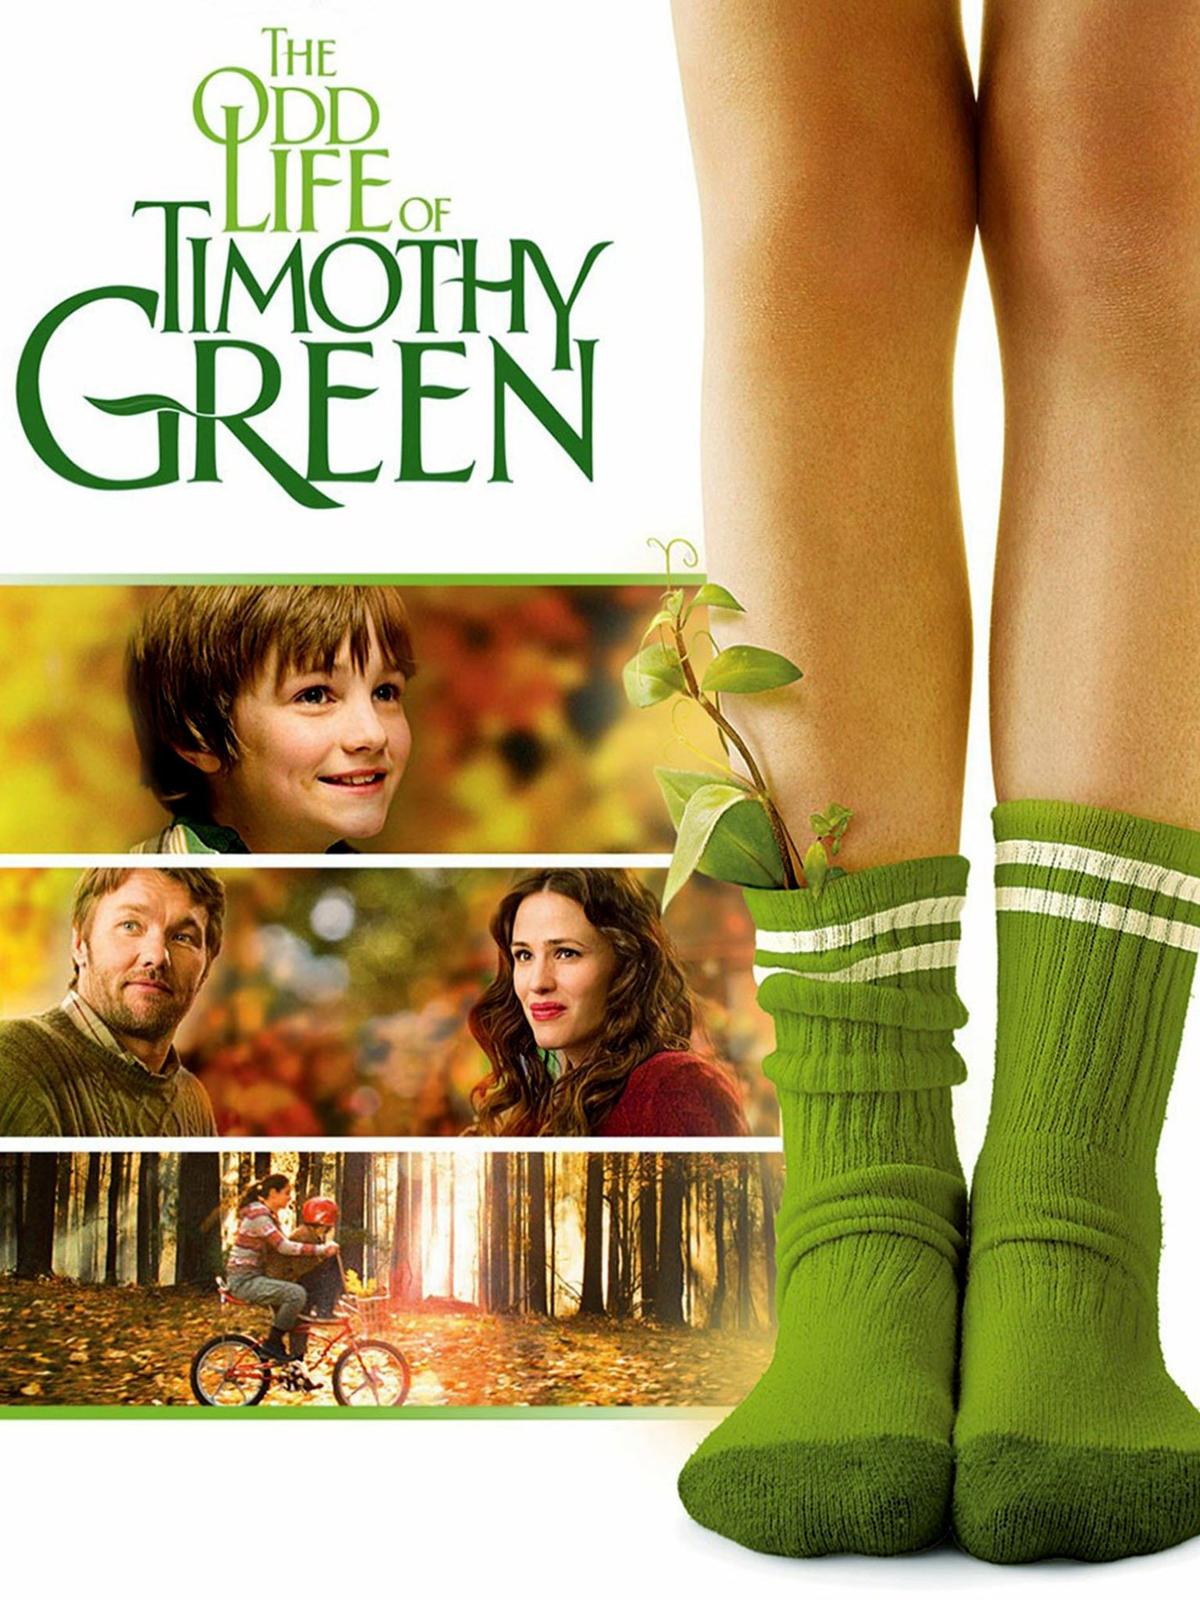 Movie poster for "The Odd Life of Timothy Green." (Walt Disney Studios Motion Pictures)